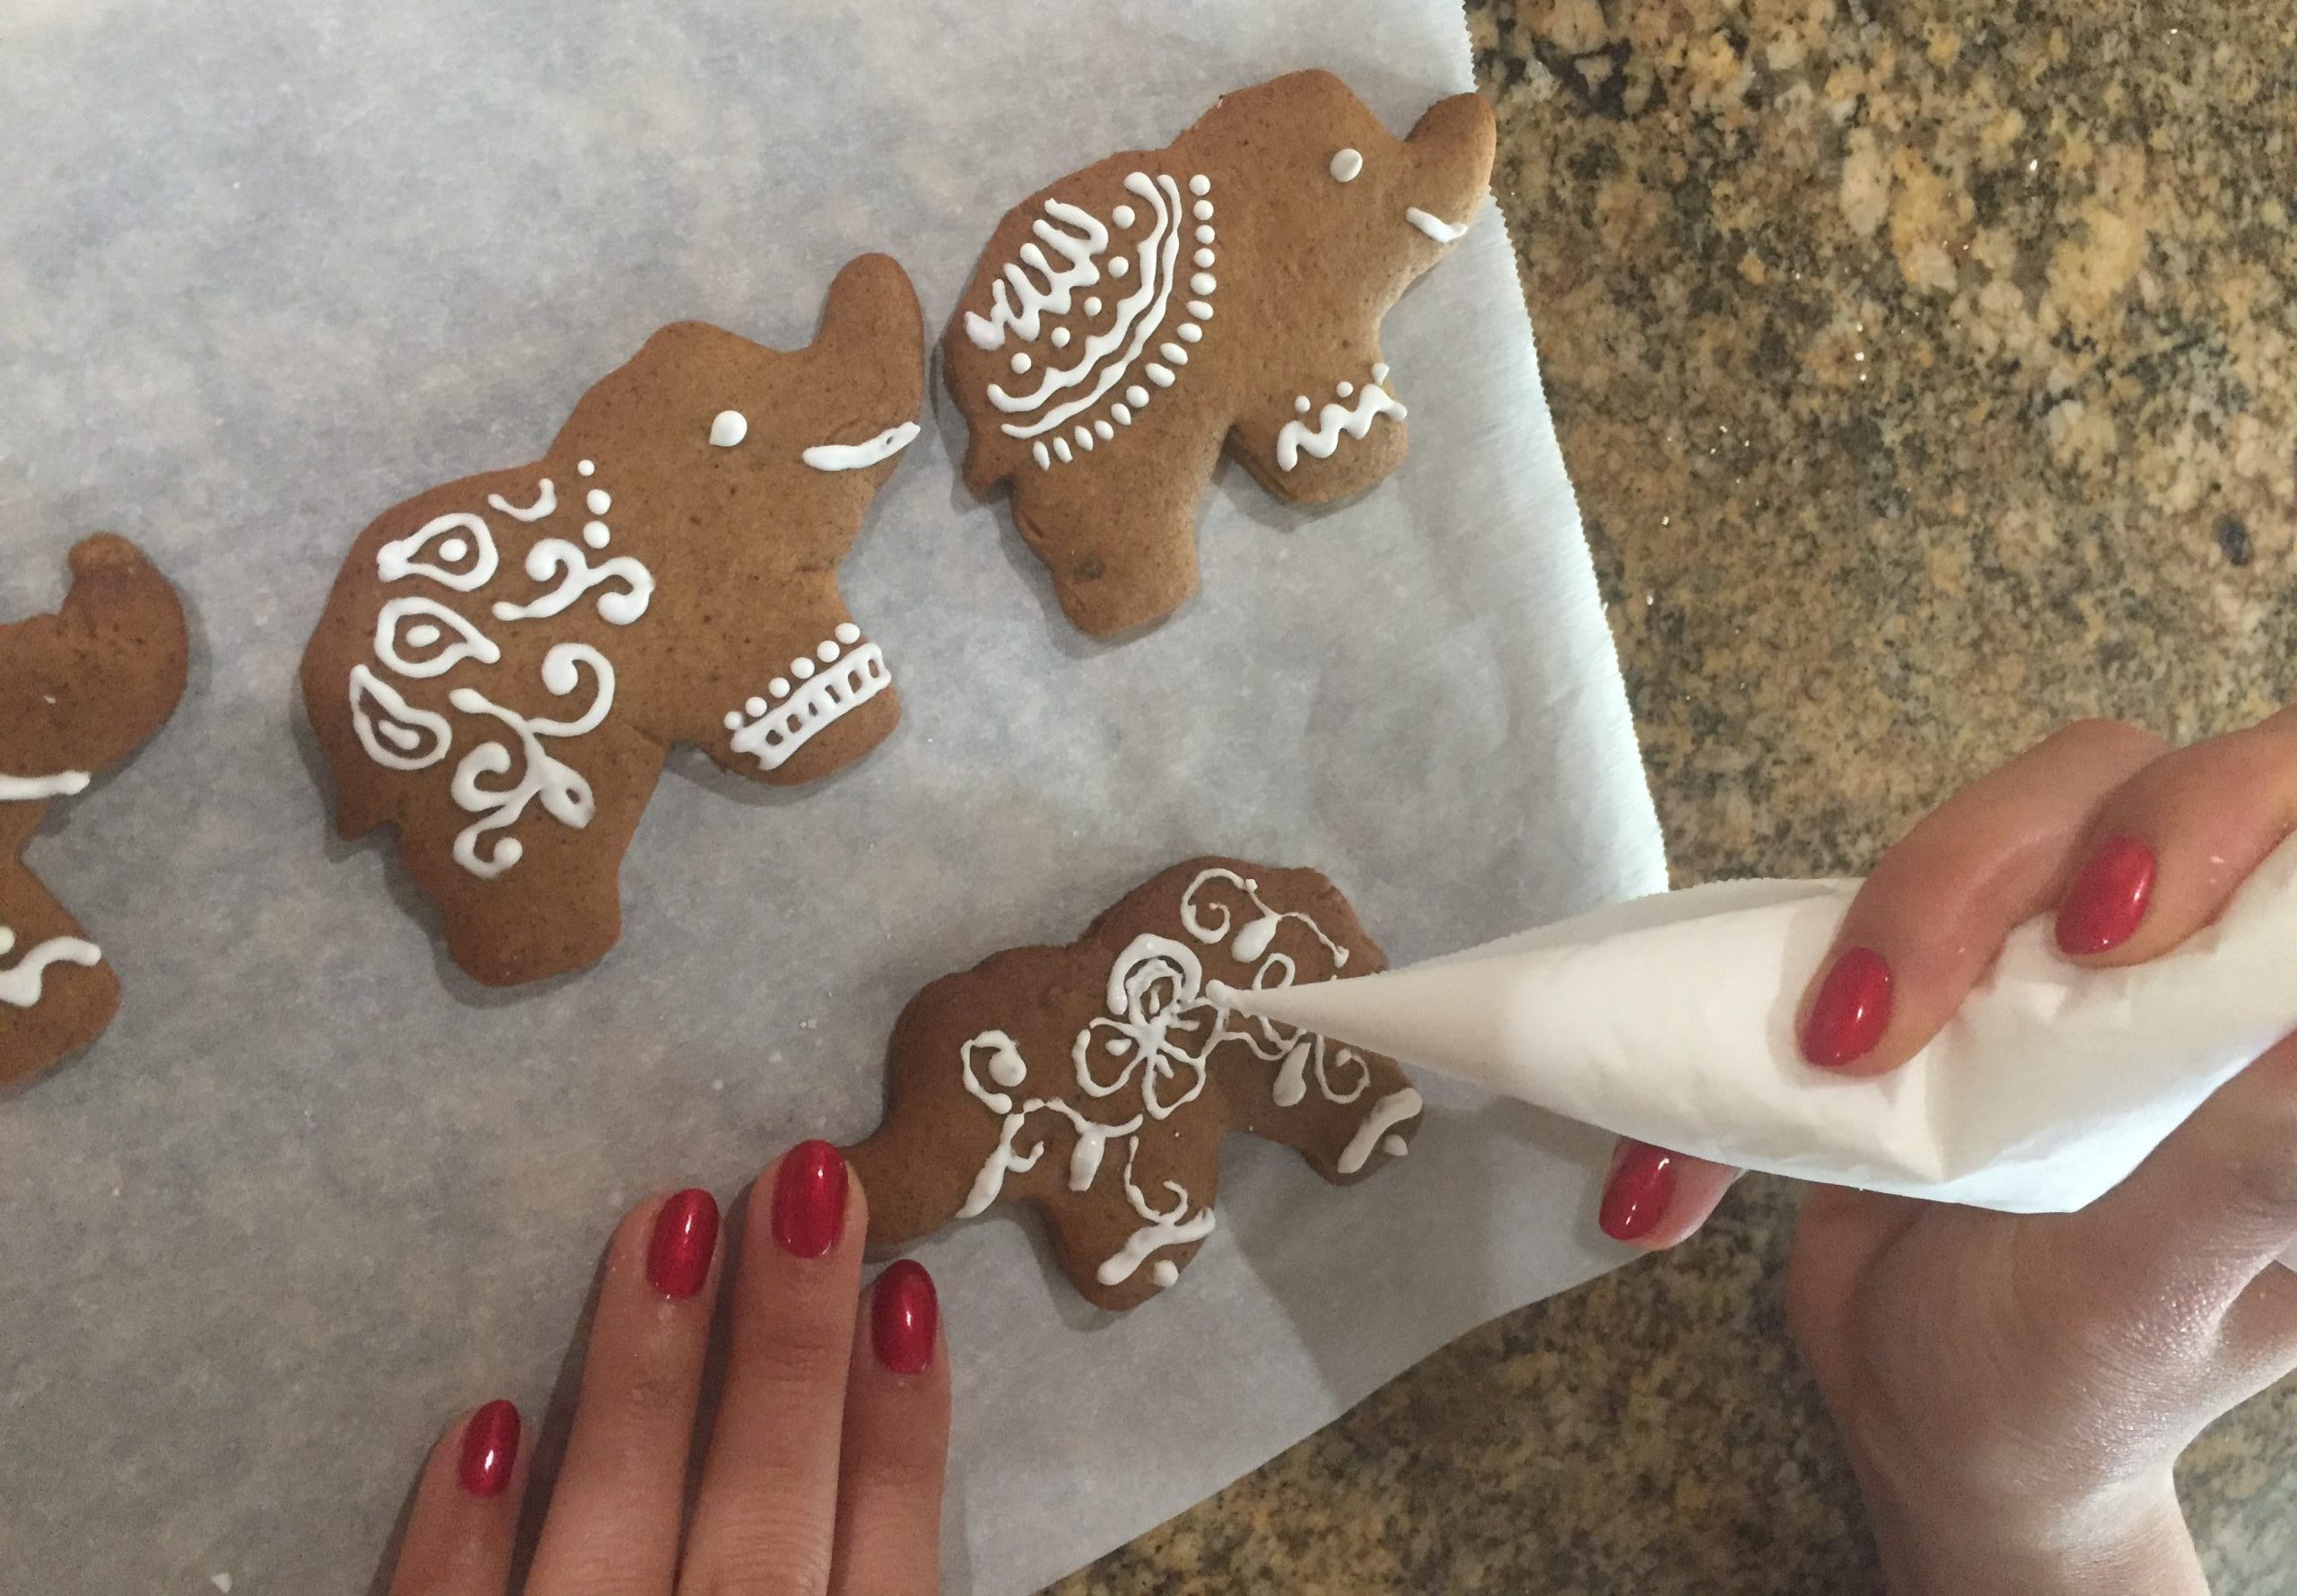 Decorate cookies with royal icing.